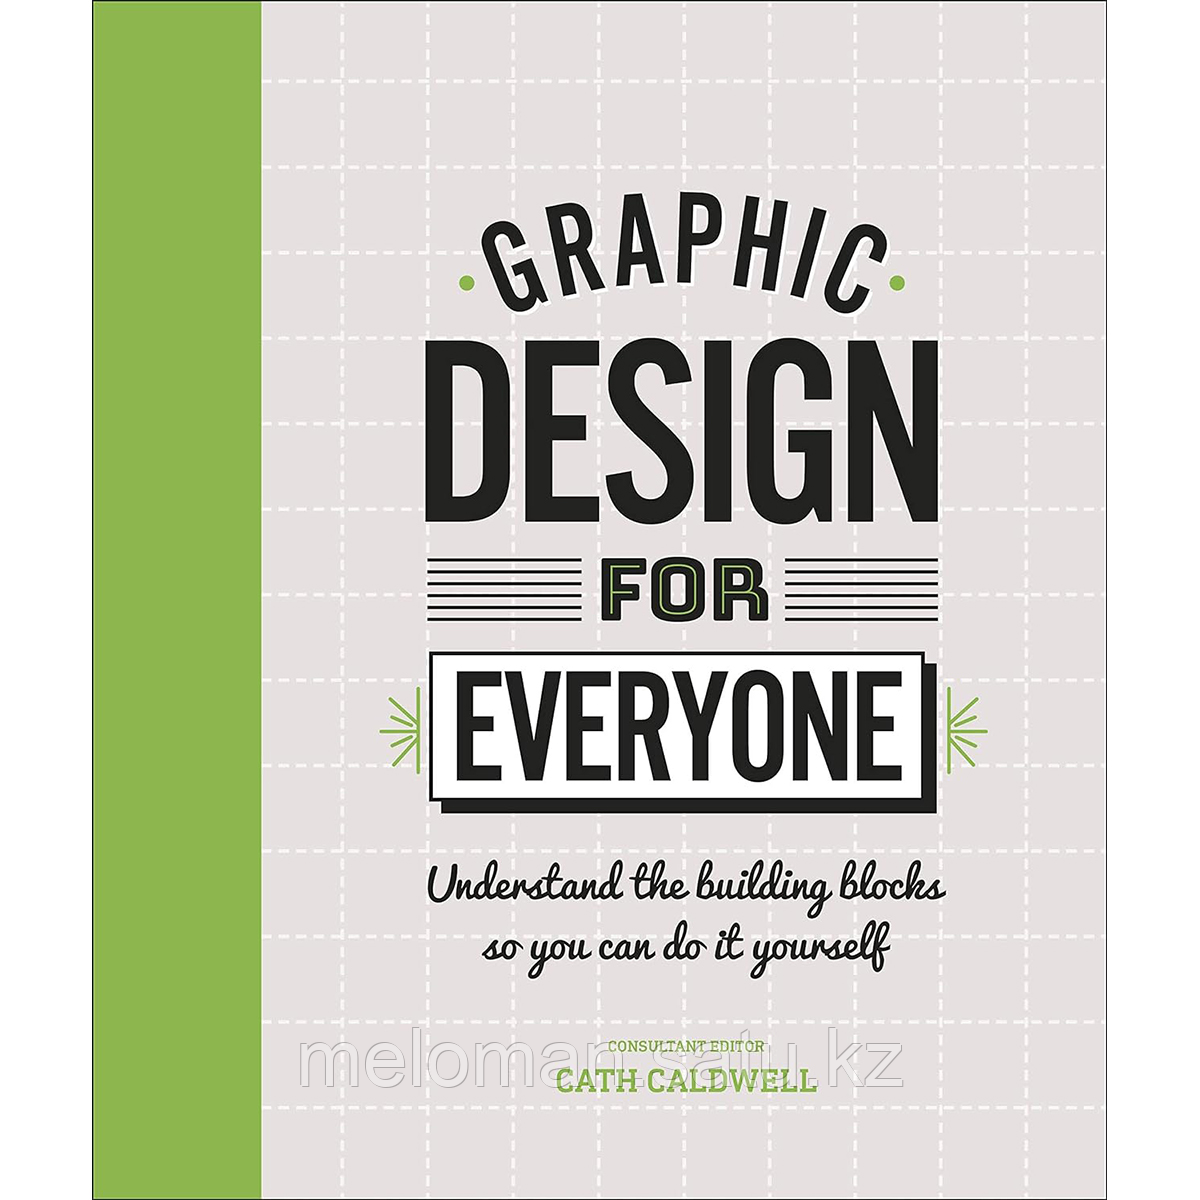 Graphic Design For Everyone. Understand the Building Blocks so You can Do It Yourself - фото 1 - id-p116453650